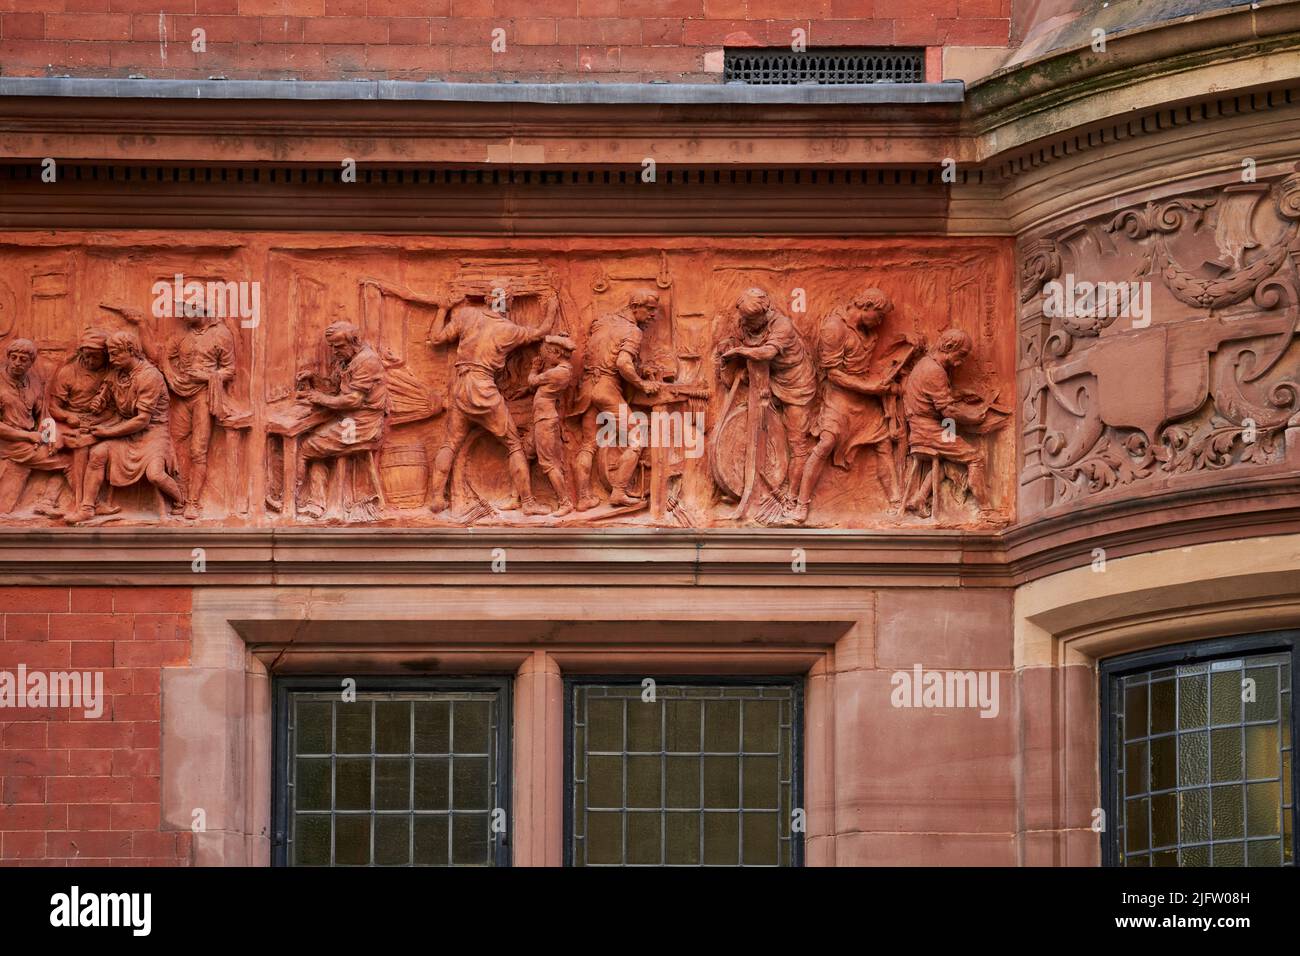 The Cheswick Frieze at Cutlers' Hall, London, UK. Stock Photo